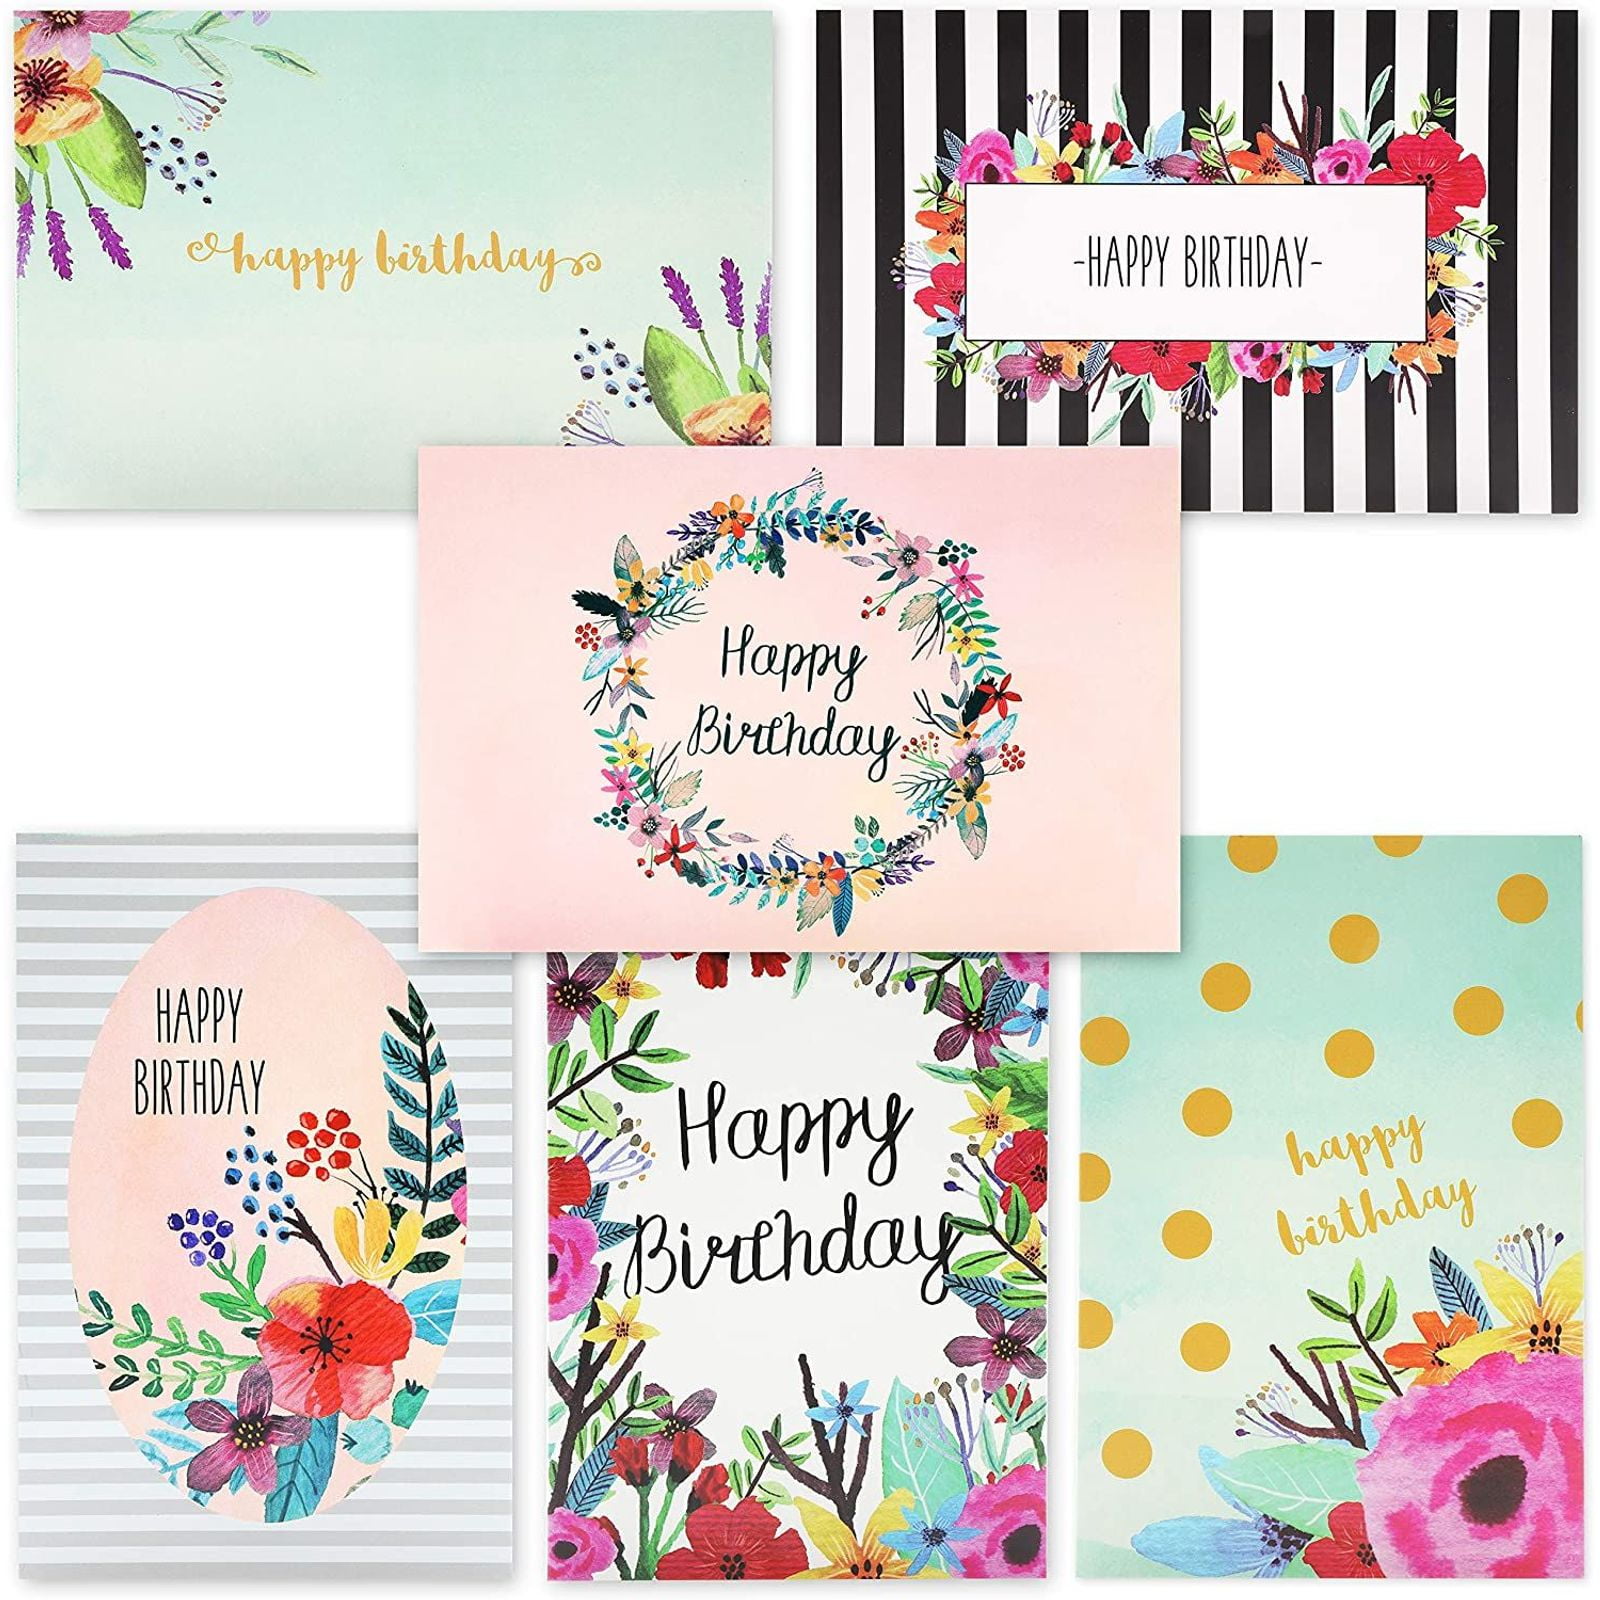 FOOTBALL Personalised Birthday Card Sister Daughter Any Relation Age Colour 